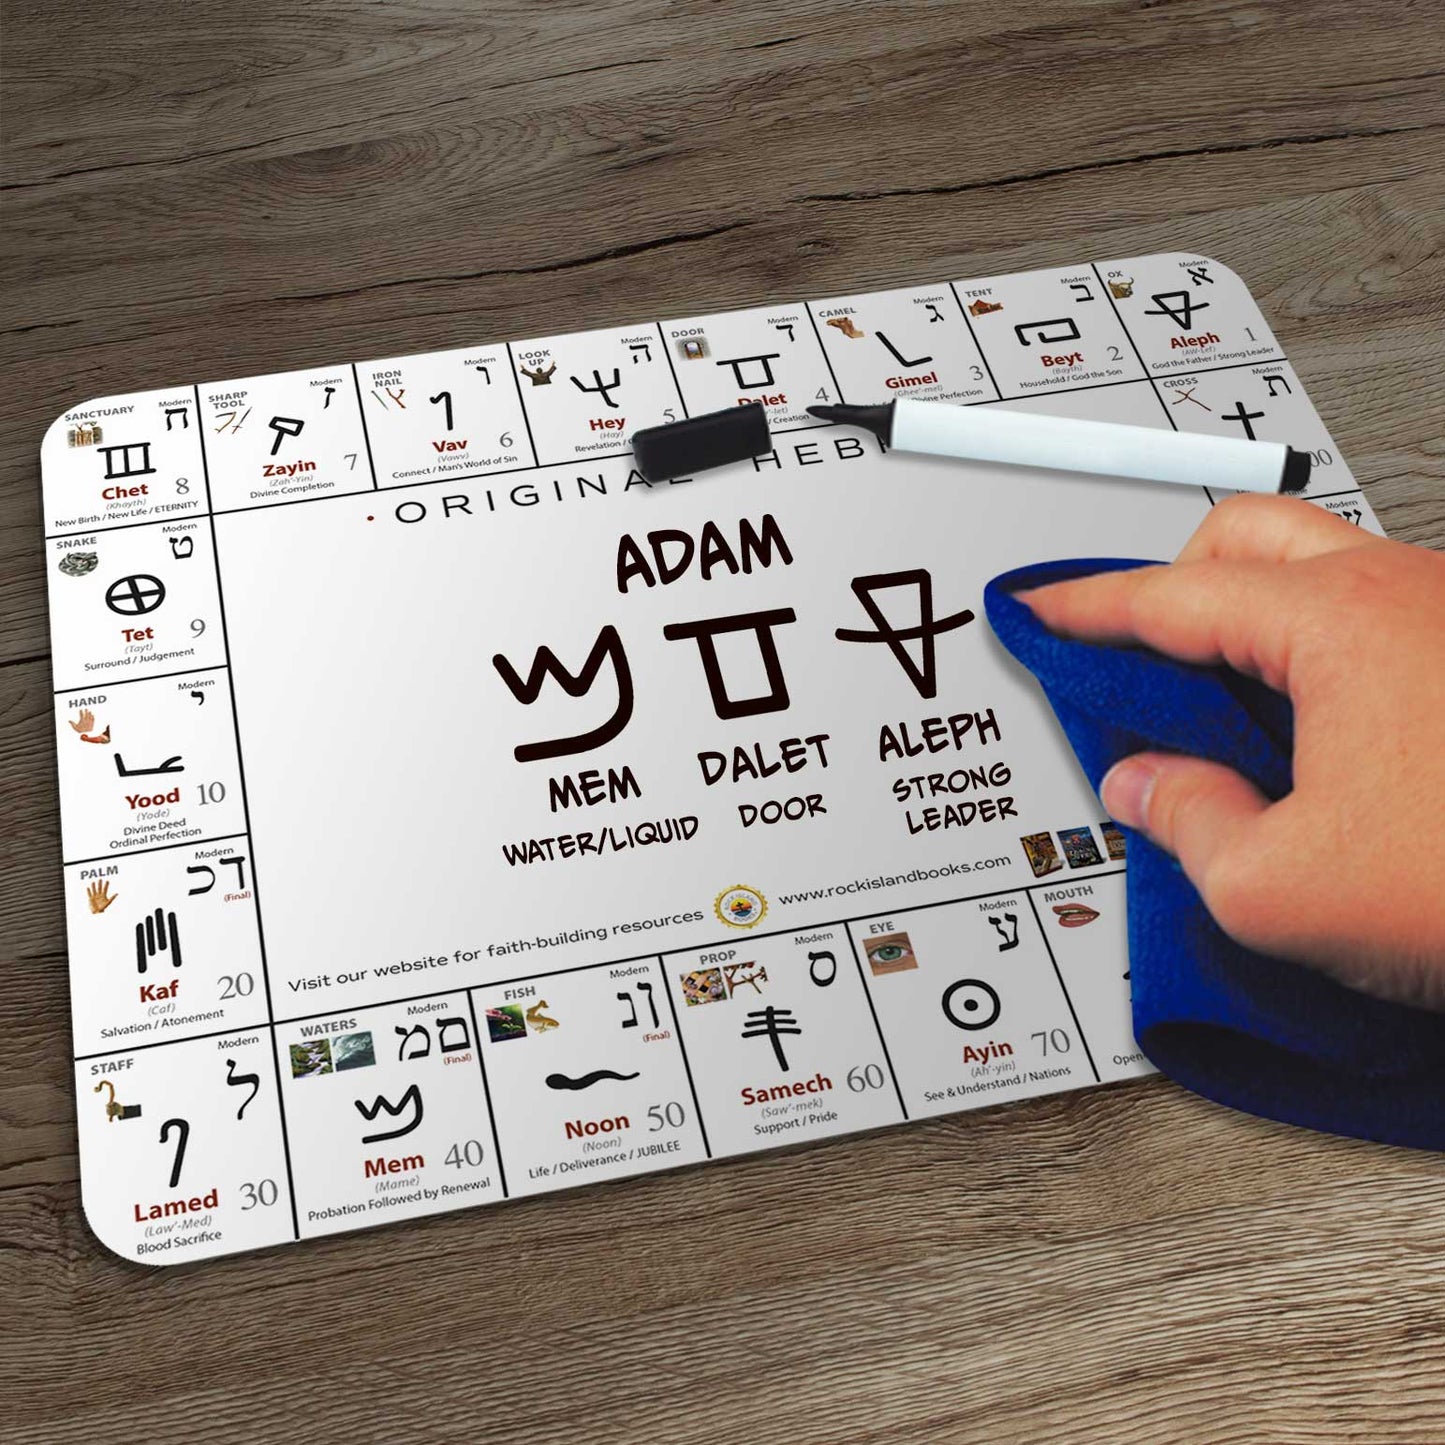 2-Piece Bundle Special! - Hebrew Language Package: Hebrew Letter Whiteboard and Hebrew Teaching Cards